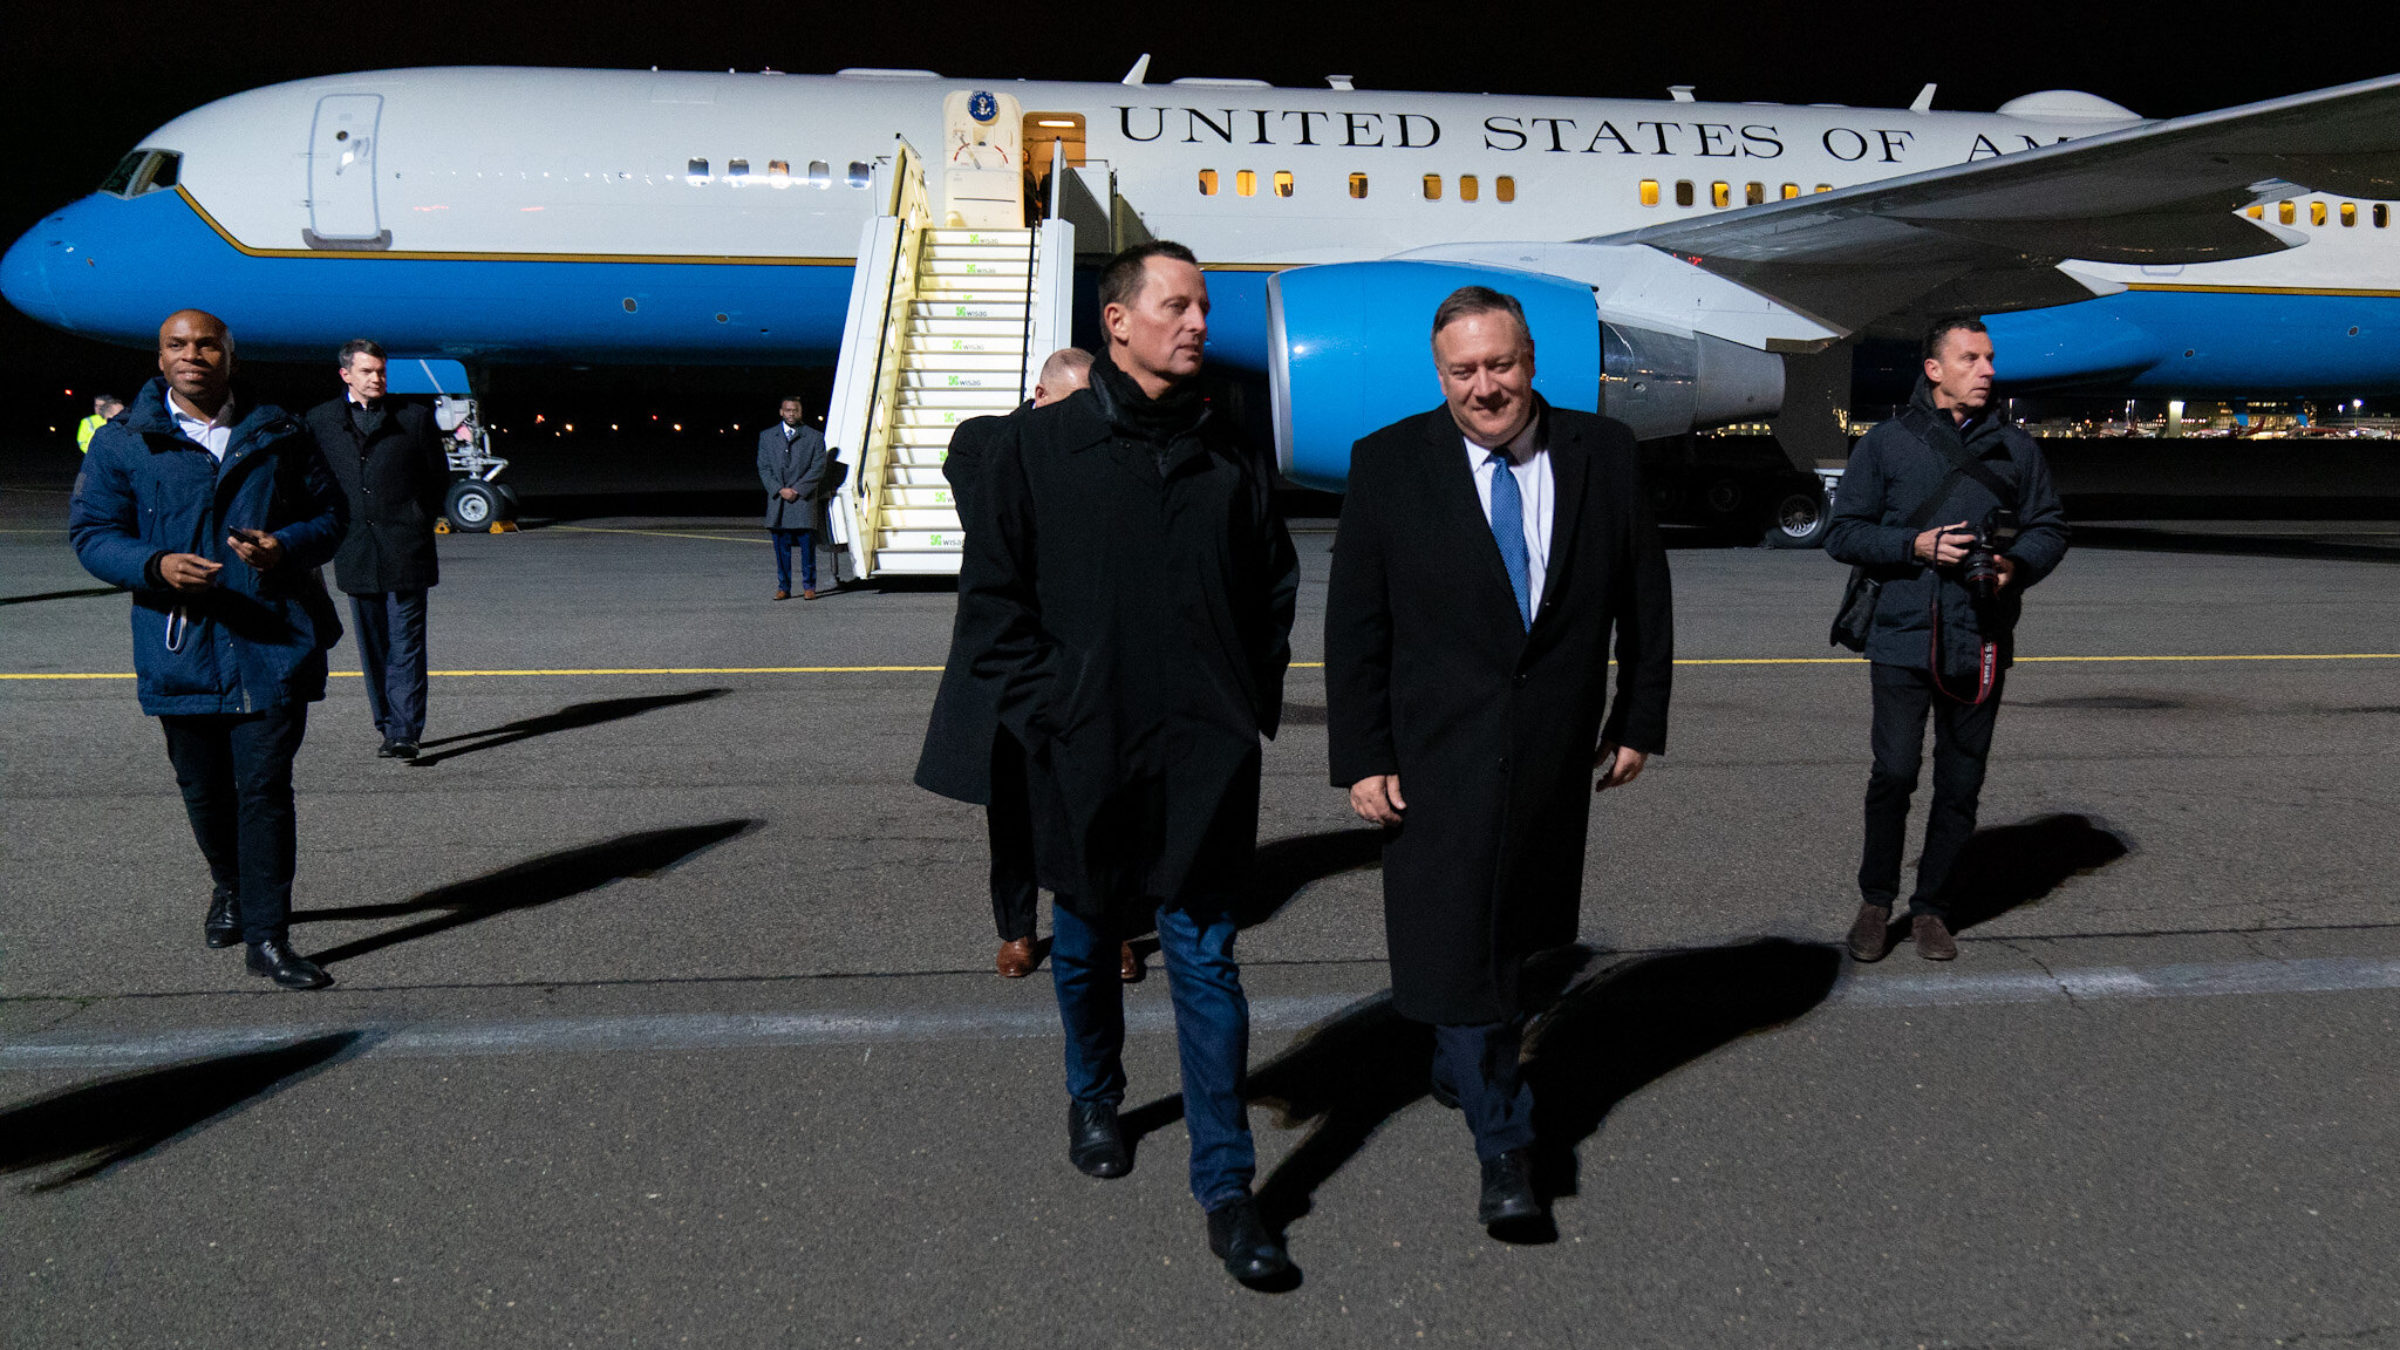 Mike Pompeo and Richard Grenell walk away from a plane resembling Air Force One